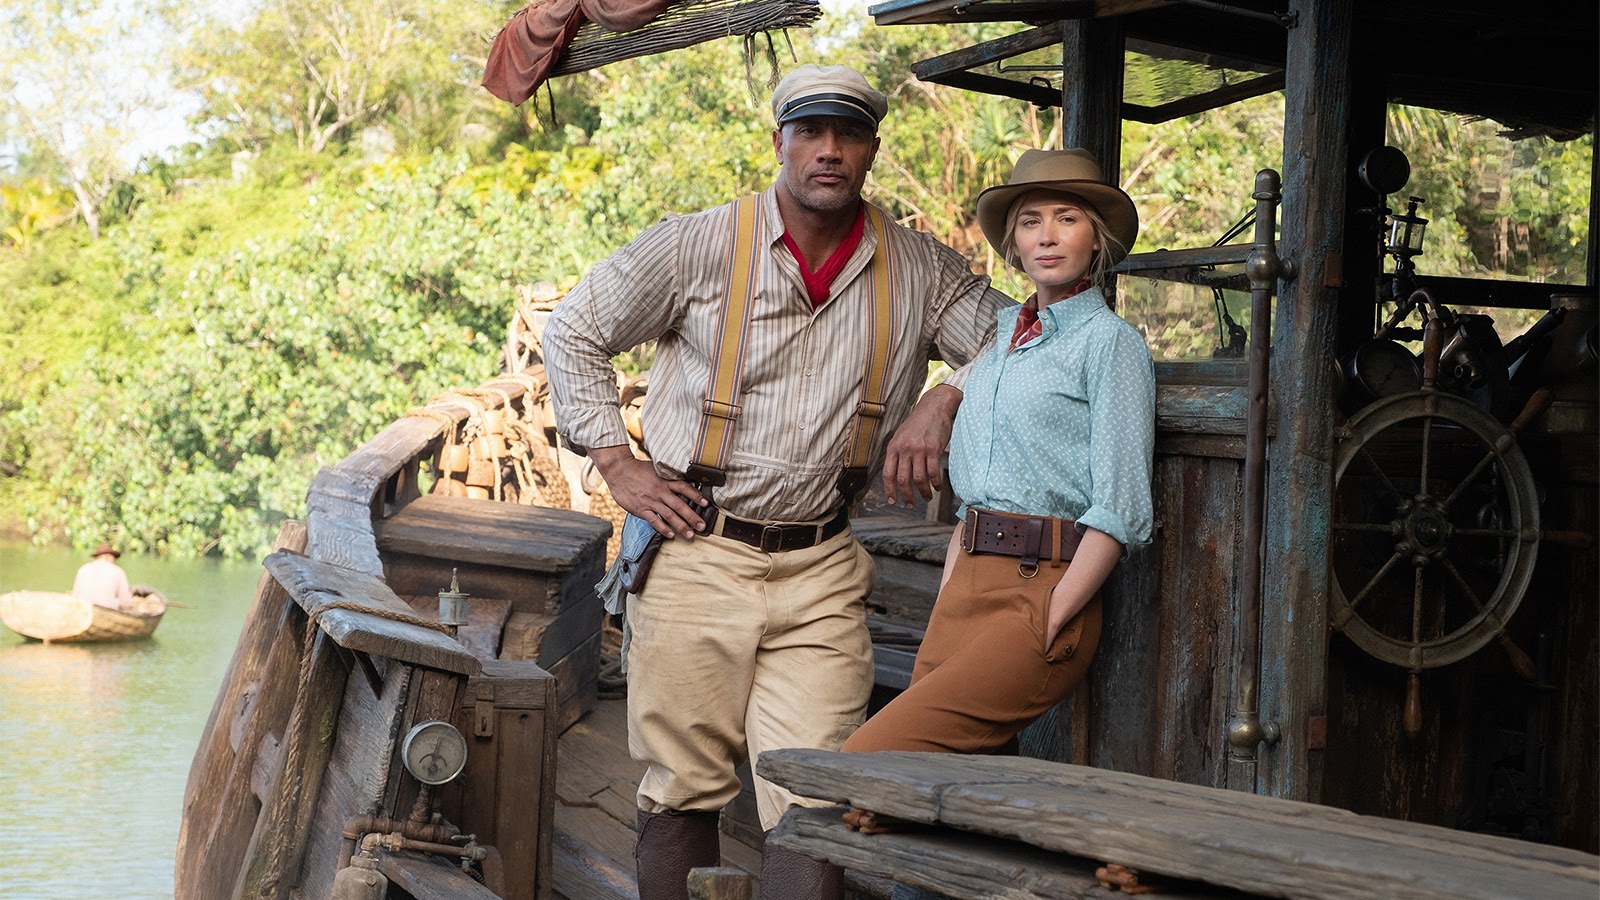 Emily Blunt and Dwayne Johnson pose on the set of Jungle Cruise.